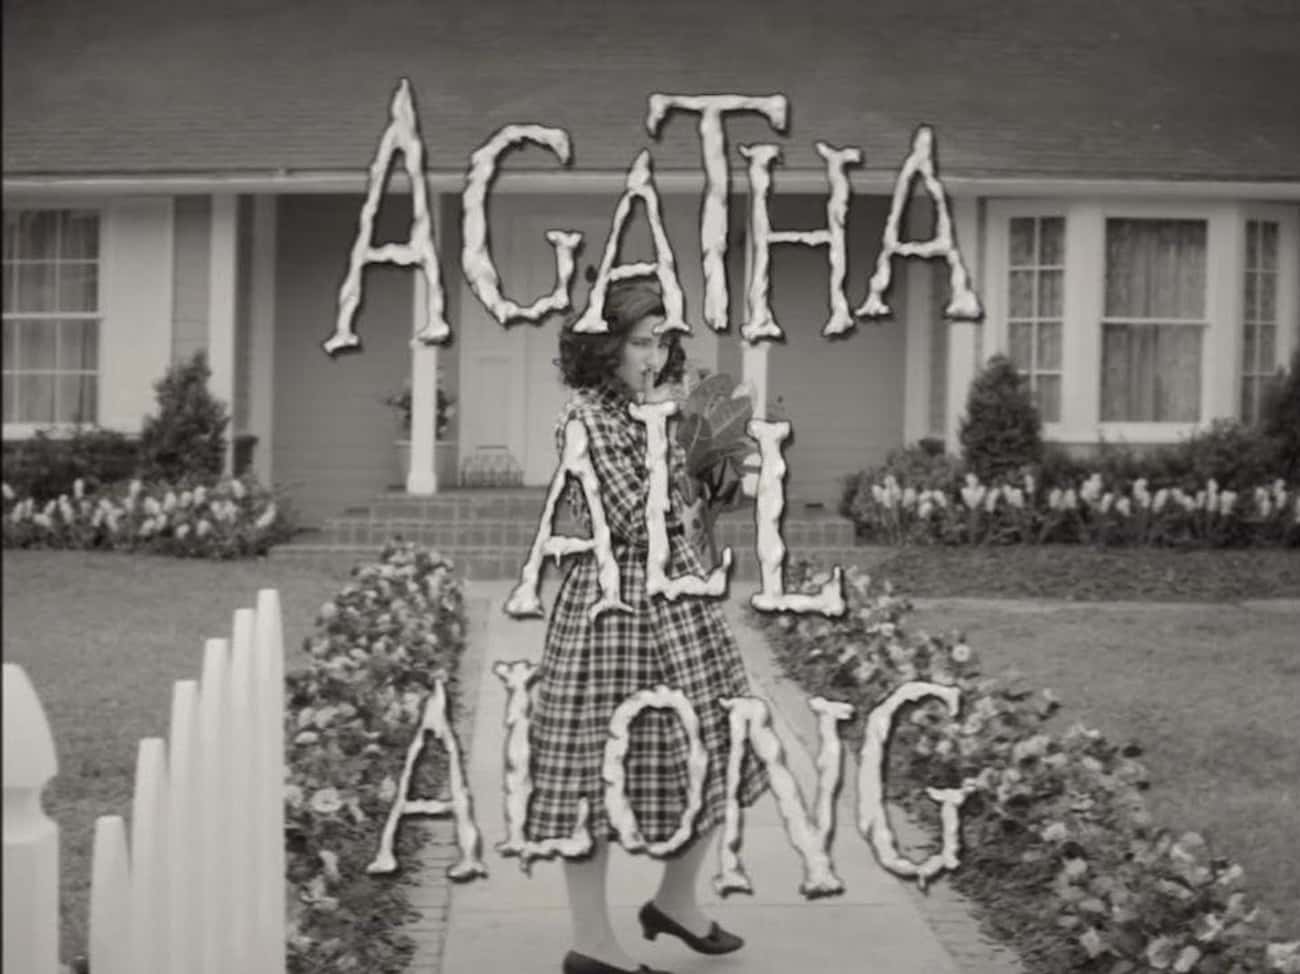 Agnes Musically Reveals That She Was 'Agatha All Along'